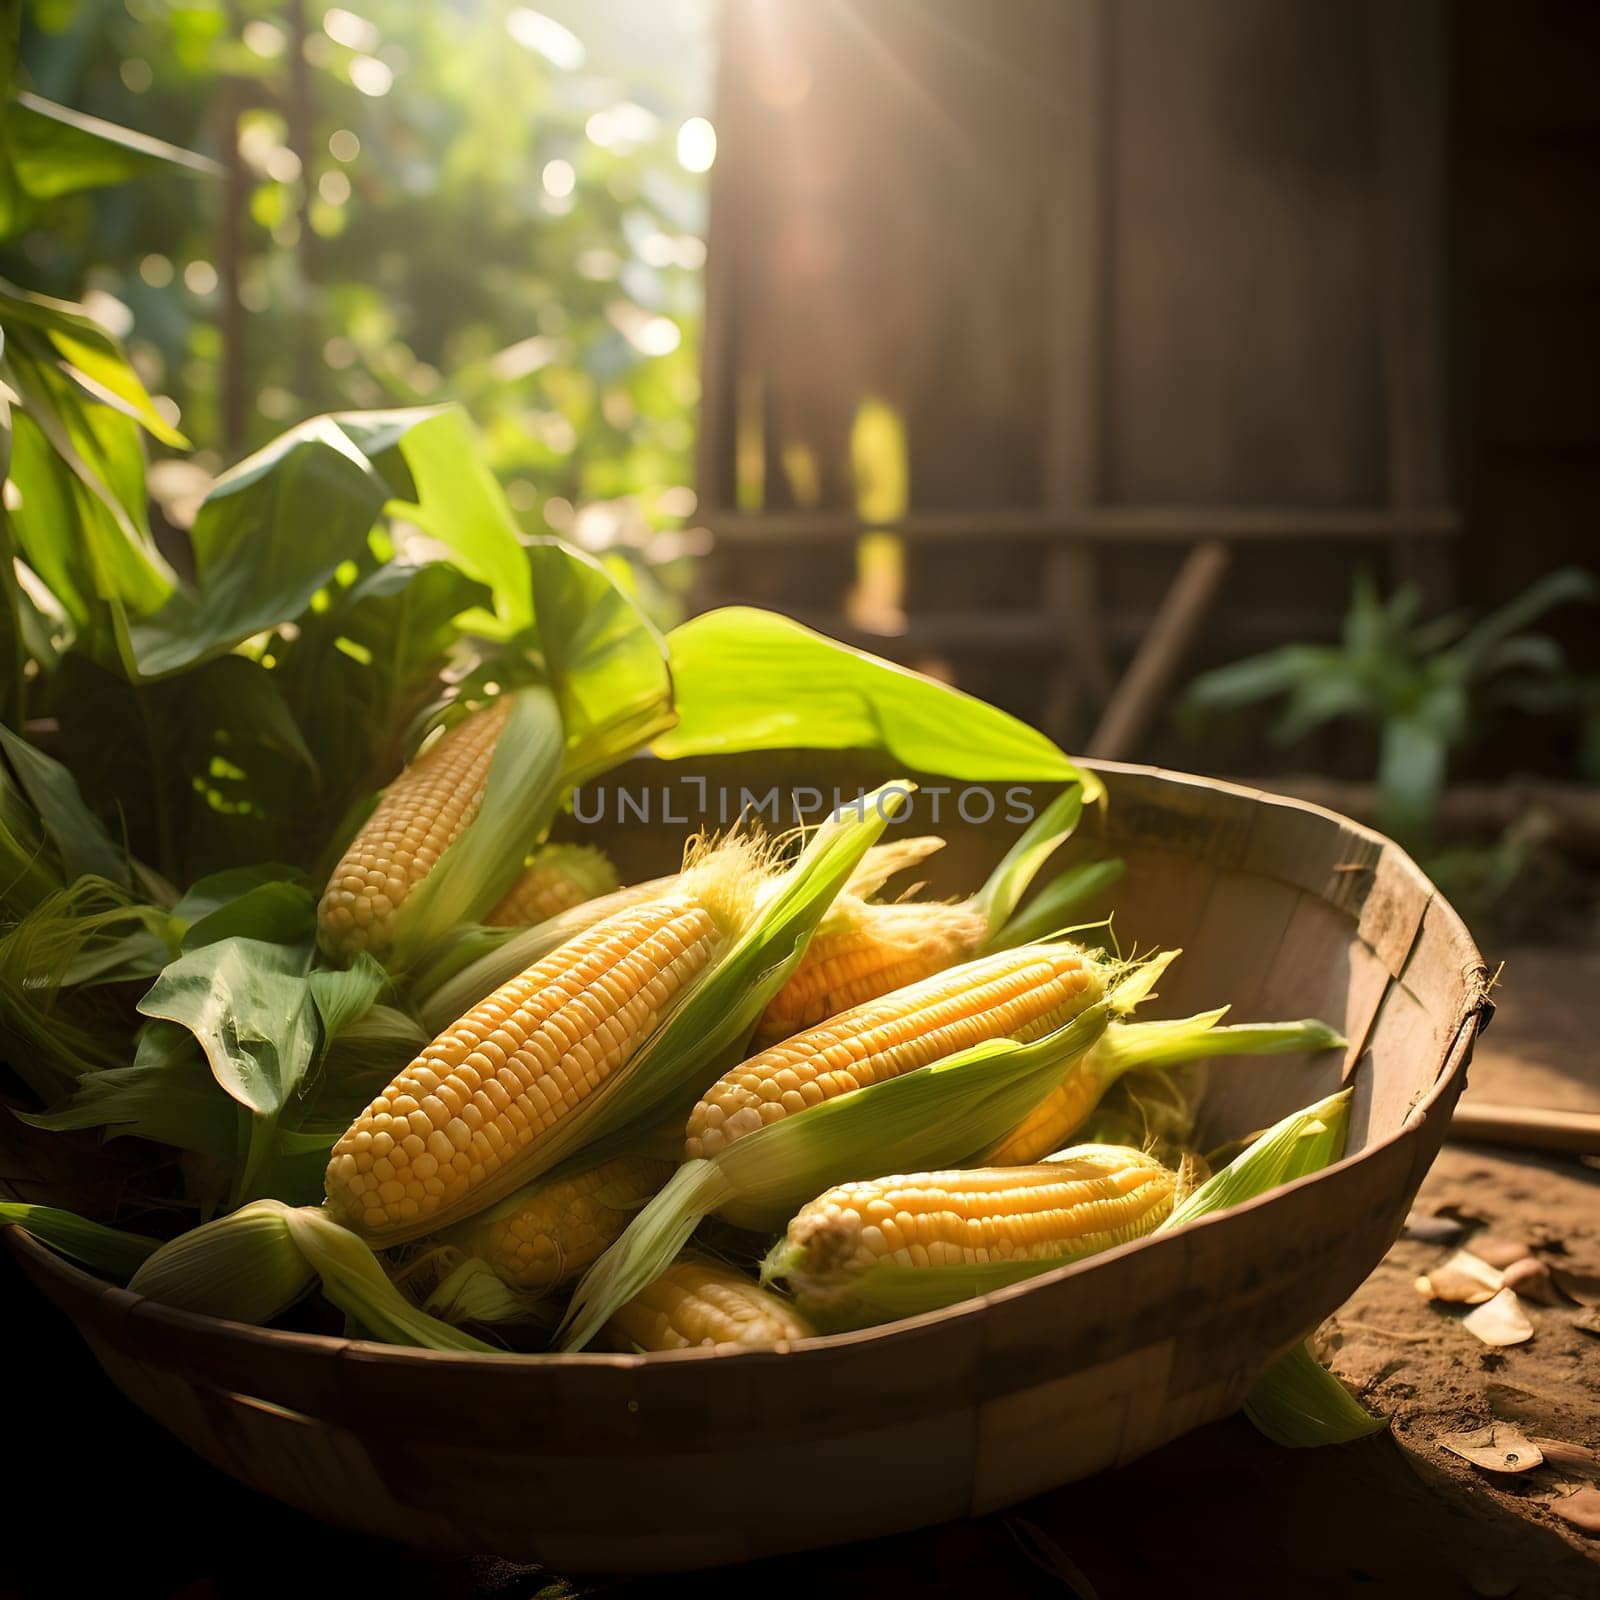 Yellow corn cobs with leaves during harvest in a fabric basket. Corn as a dish of thanksgiving for the harvest. An atmosphere of joy and celebration.